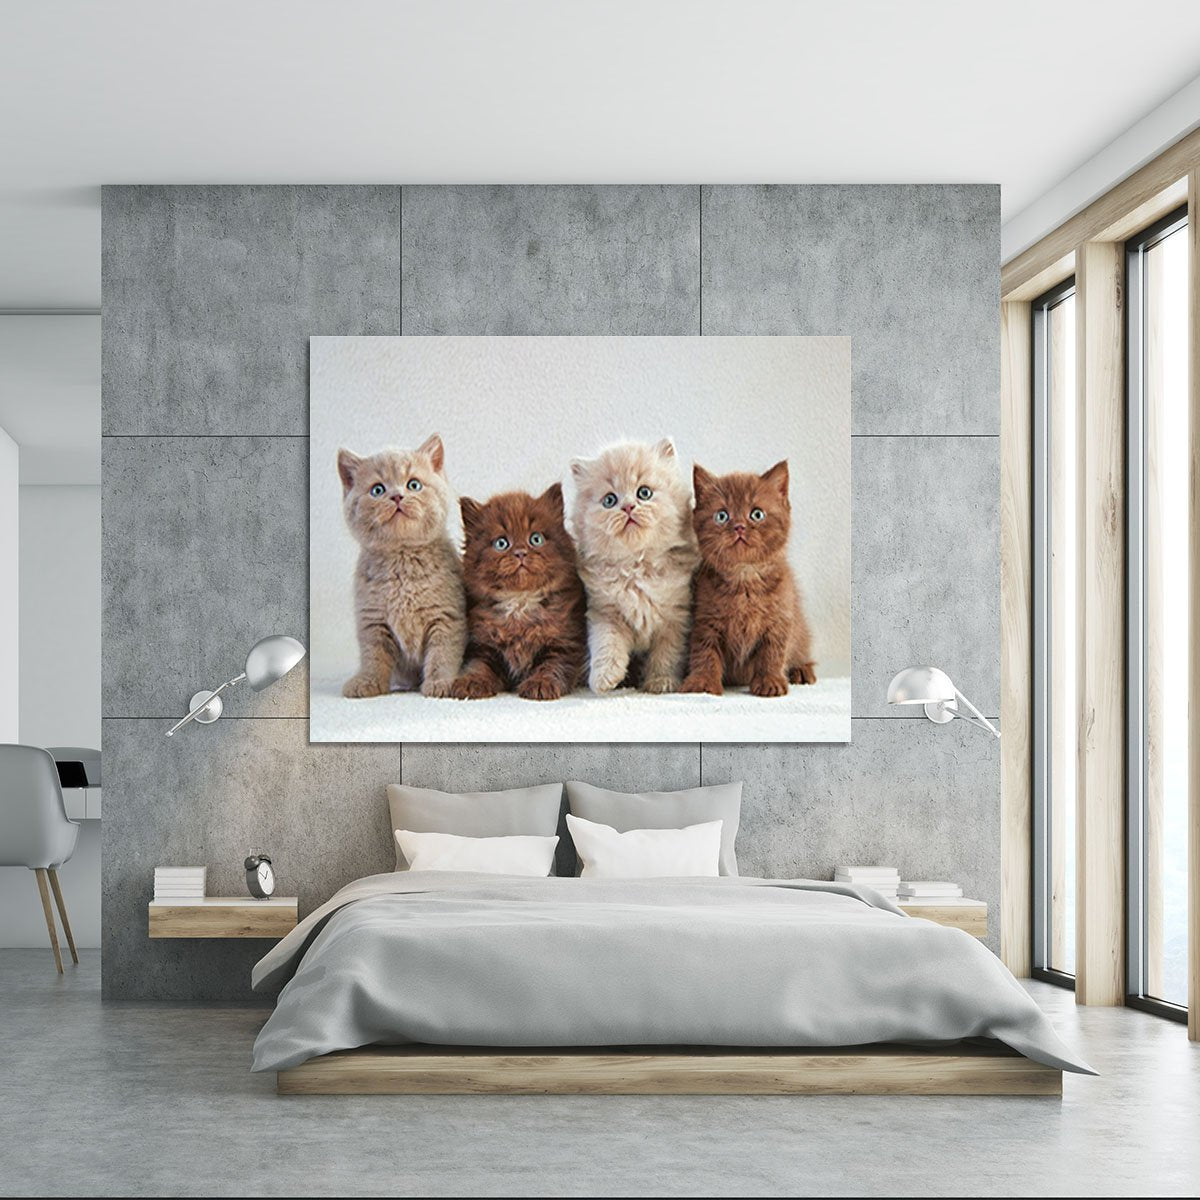 Four various british kittens Canvas Print or Poster